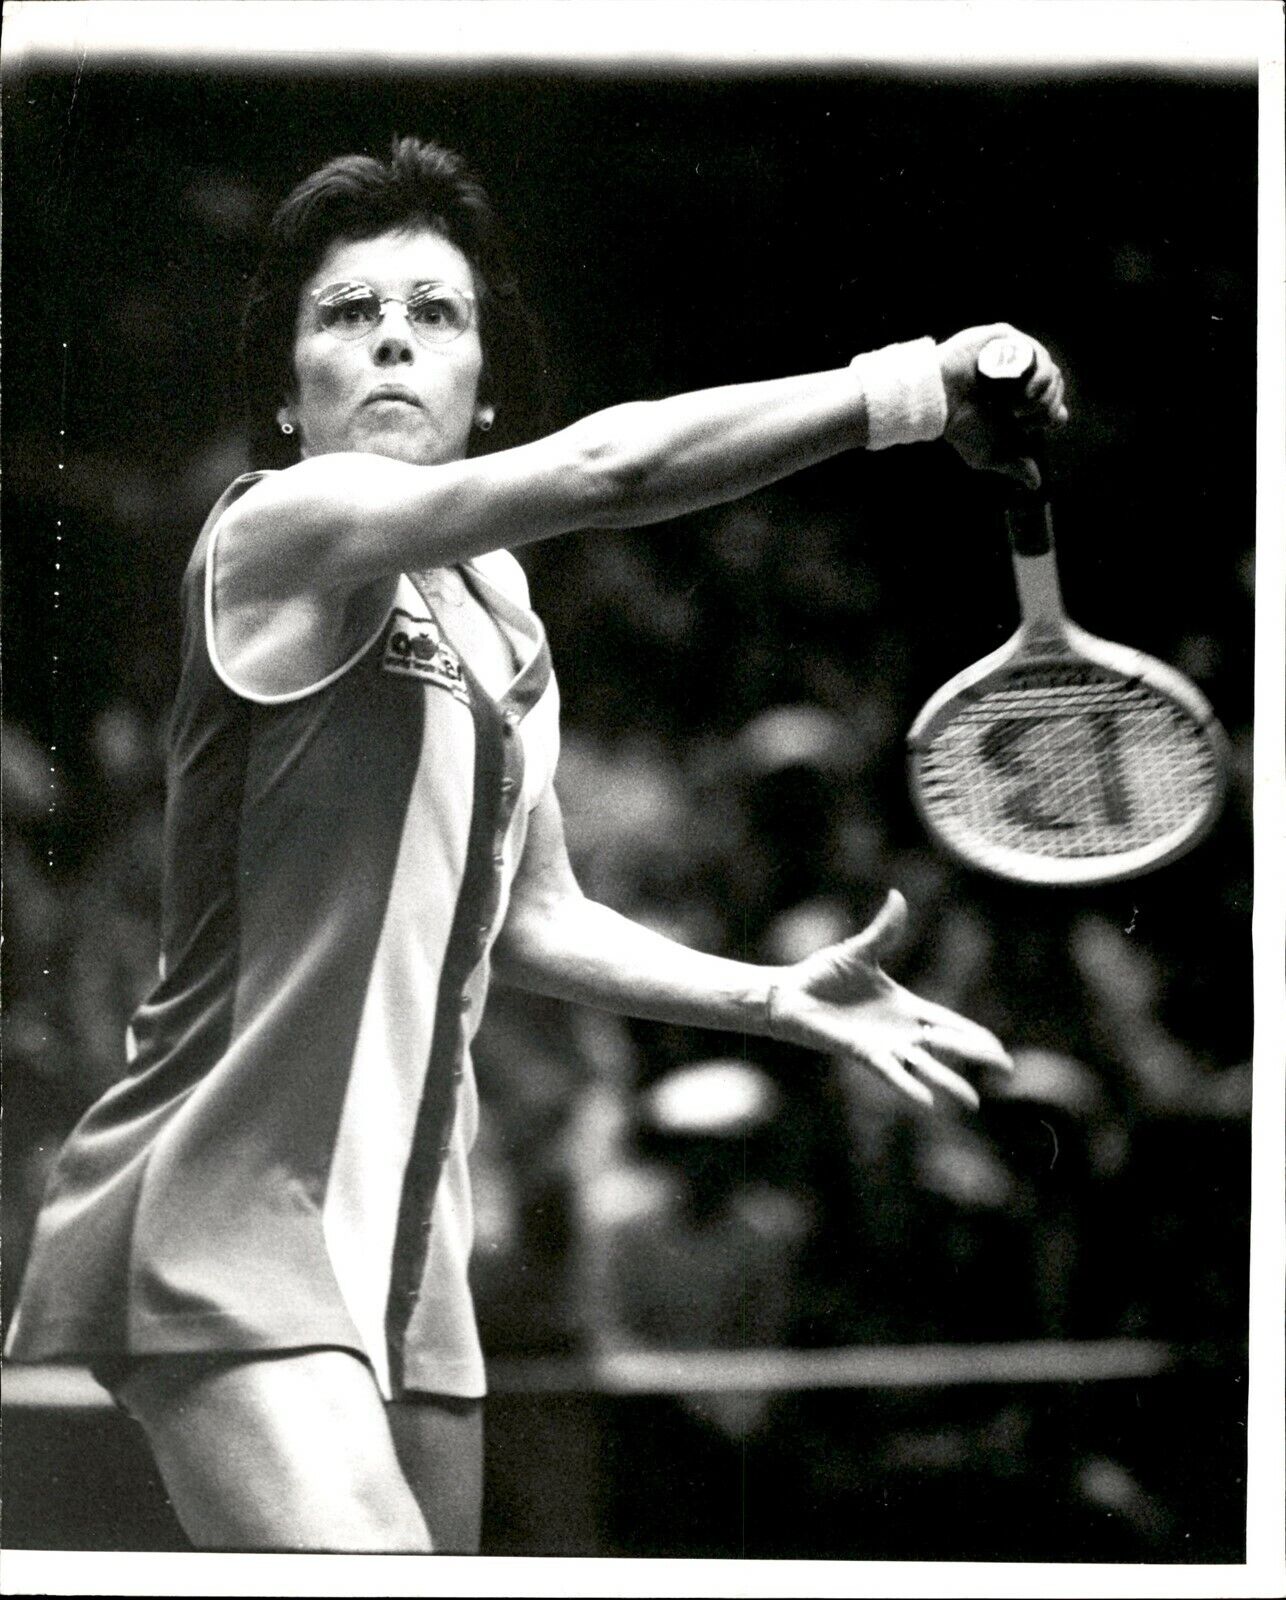 JT12 1978 Orig Ron Riesterer Photo BILLY JEAN KING TENNIS CHAMPION GAME ACTION